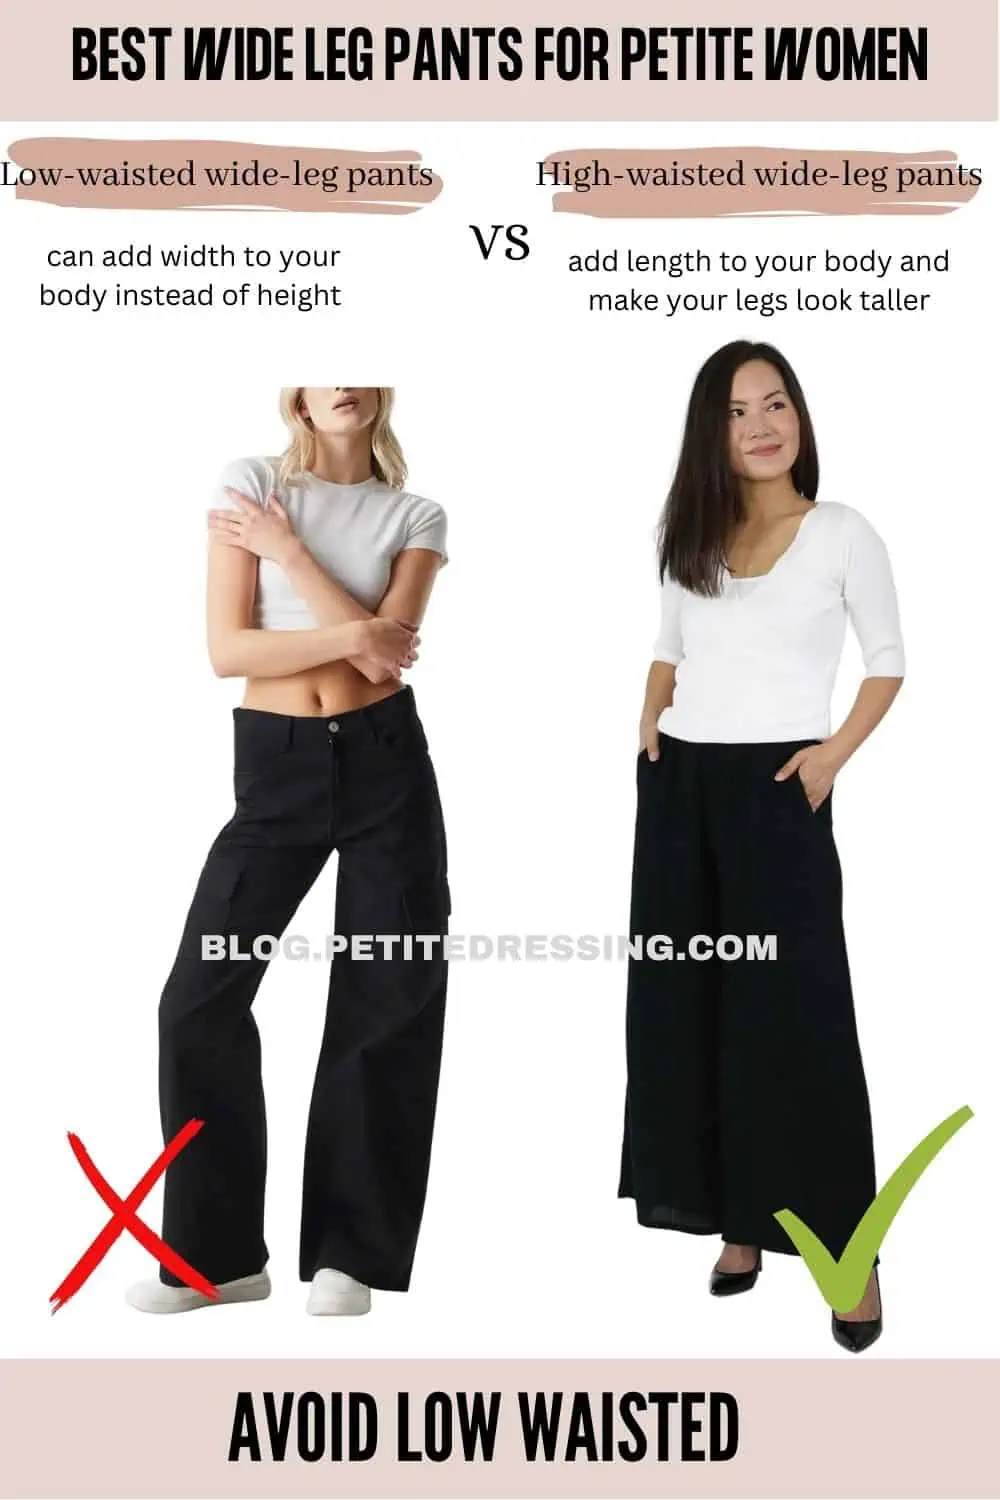 I'm 5'2, and here's the Complete Wide Leg Pants Guide for Petite